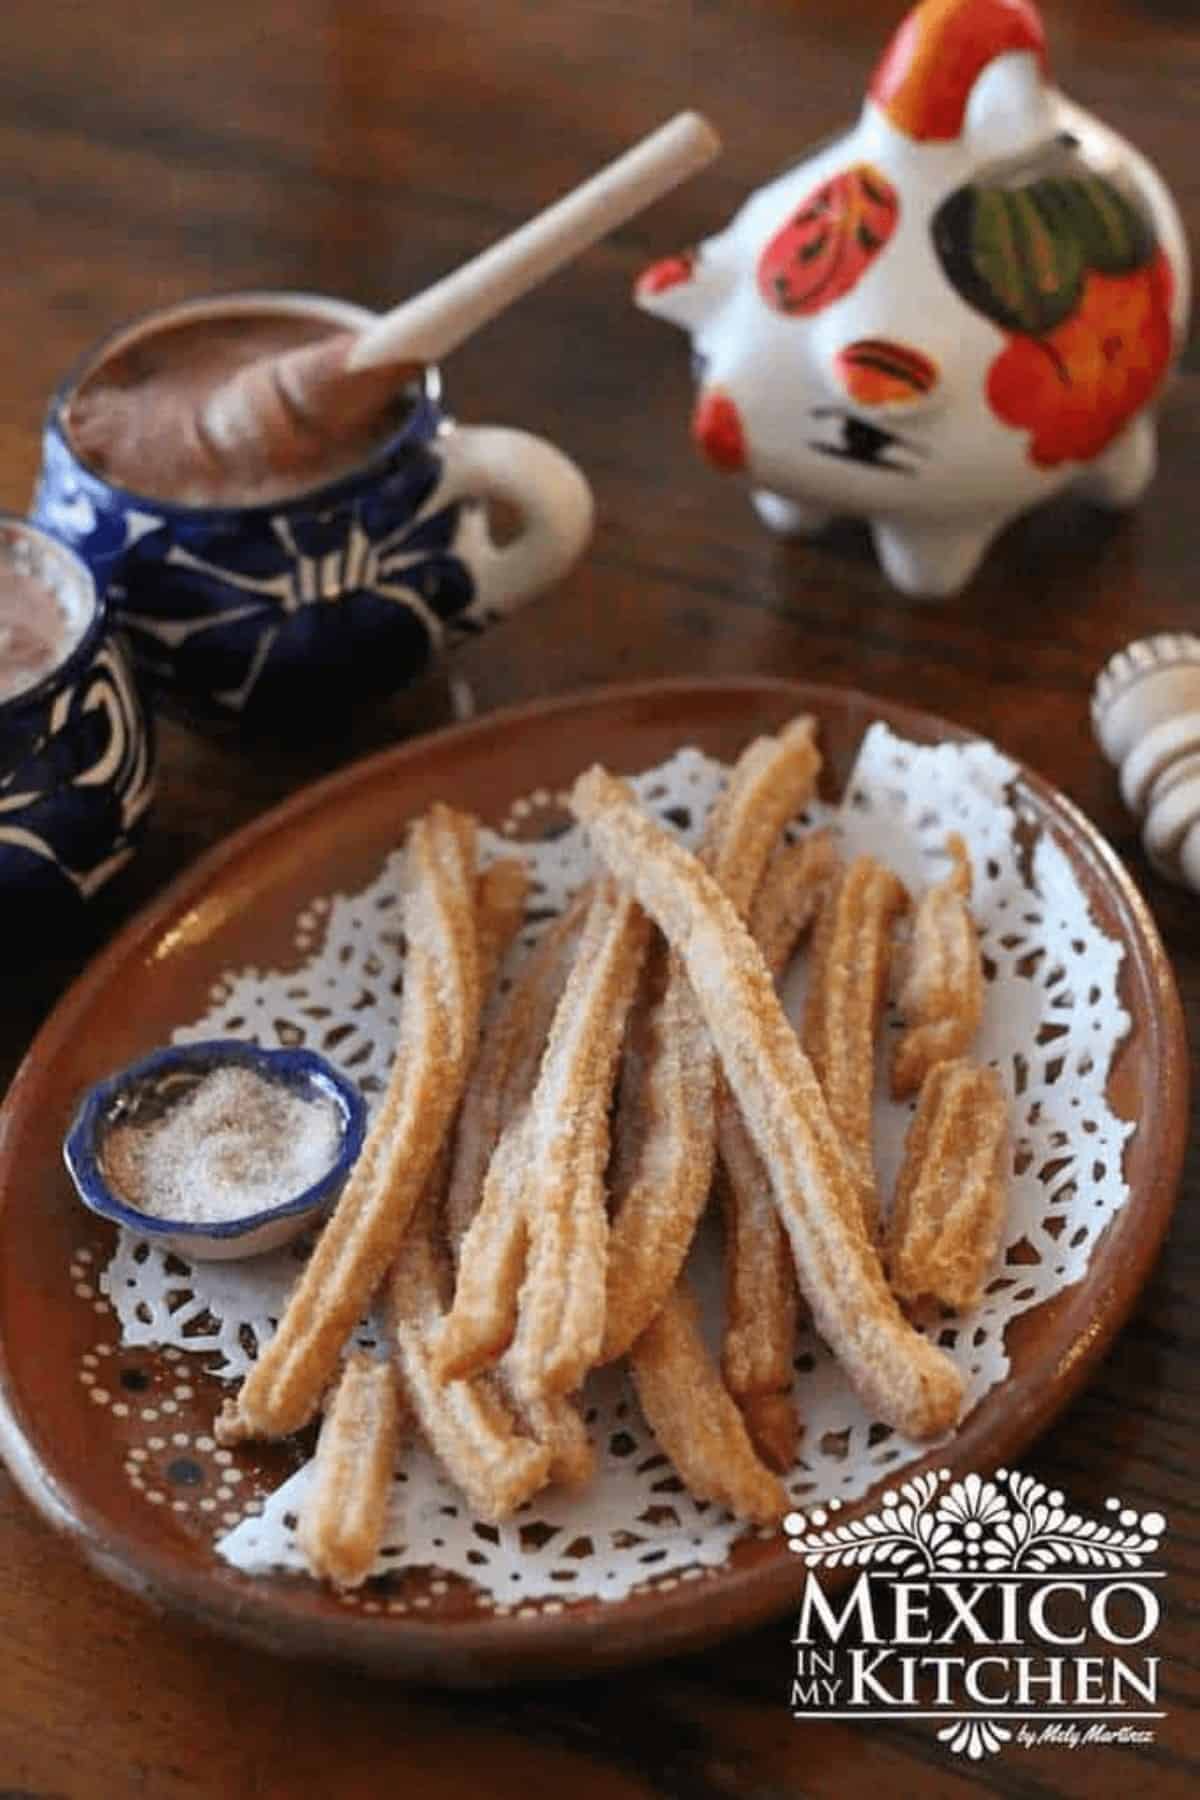 Fried Mexican pastry with cinnamon sugar